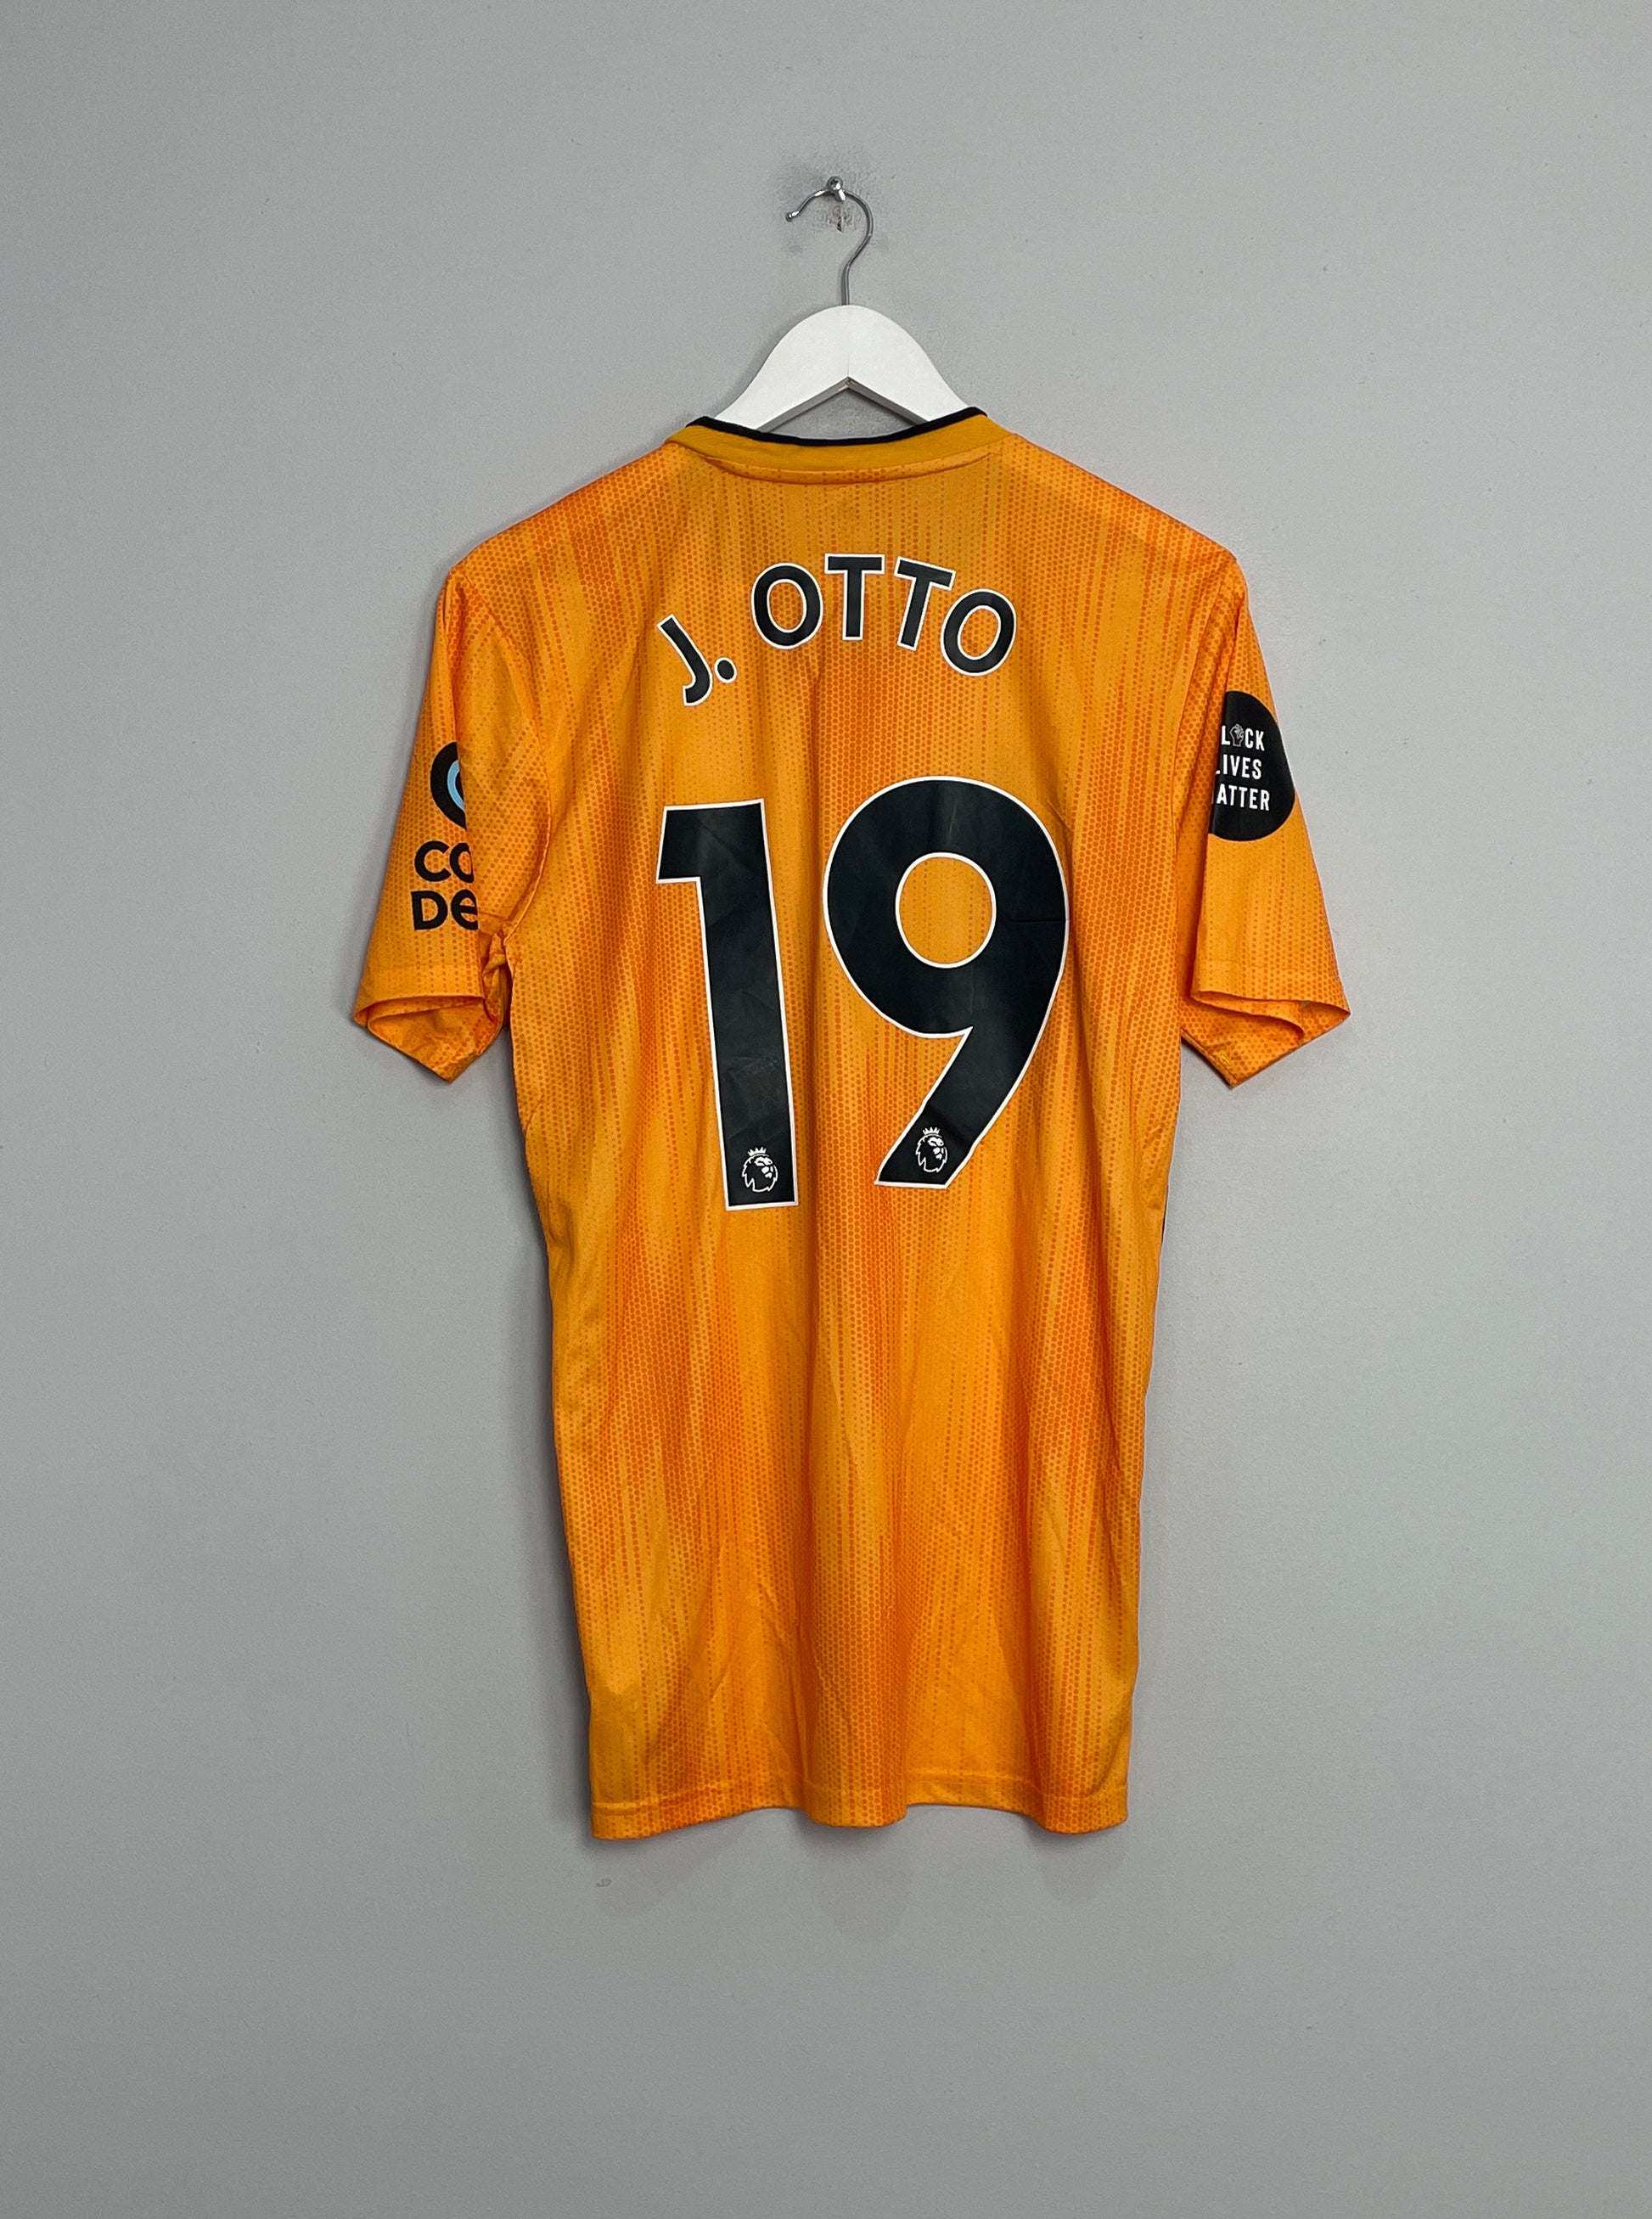 Image of the Wolves Jonny shirt from the 2019/20 season